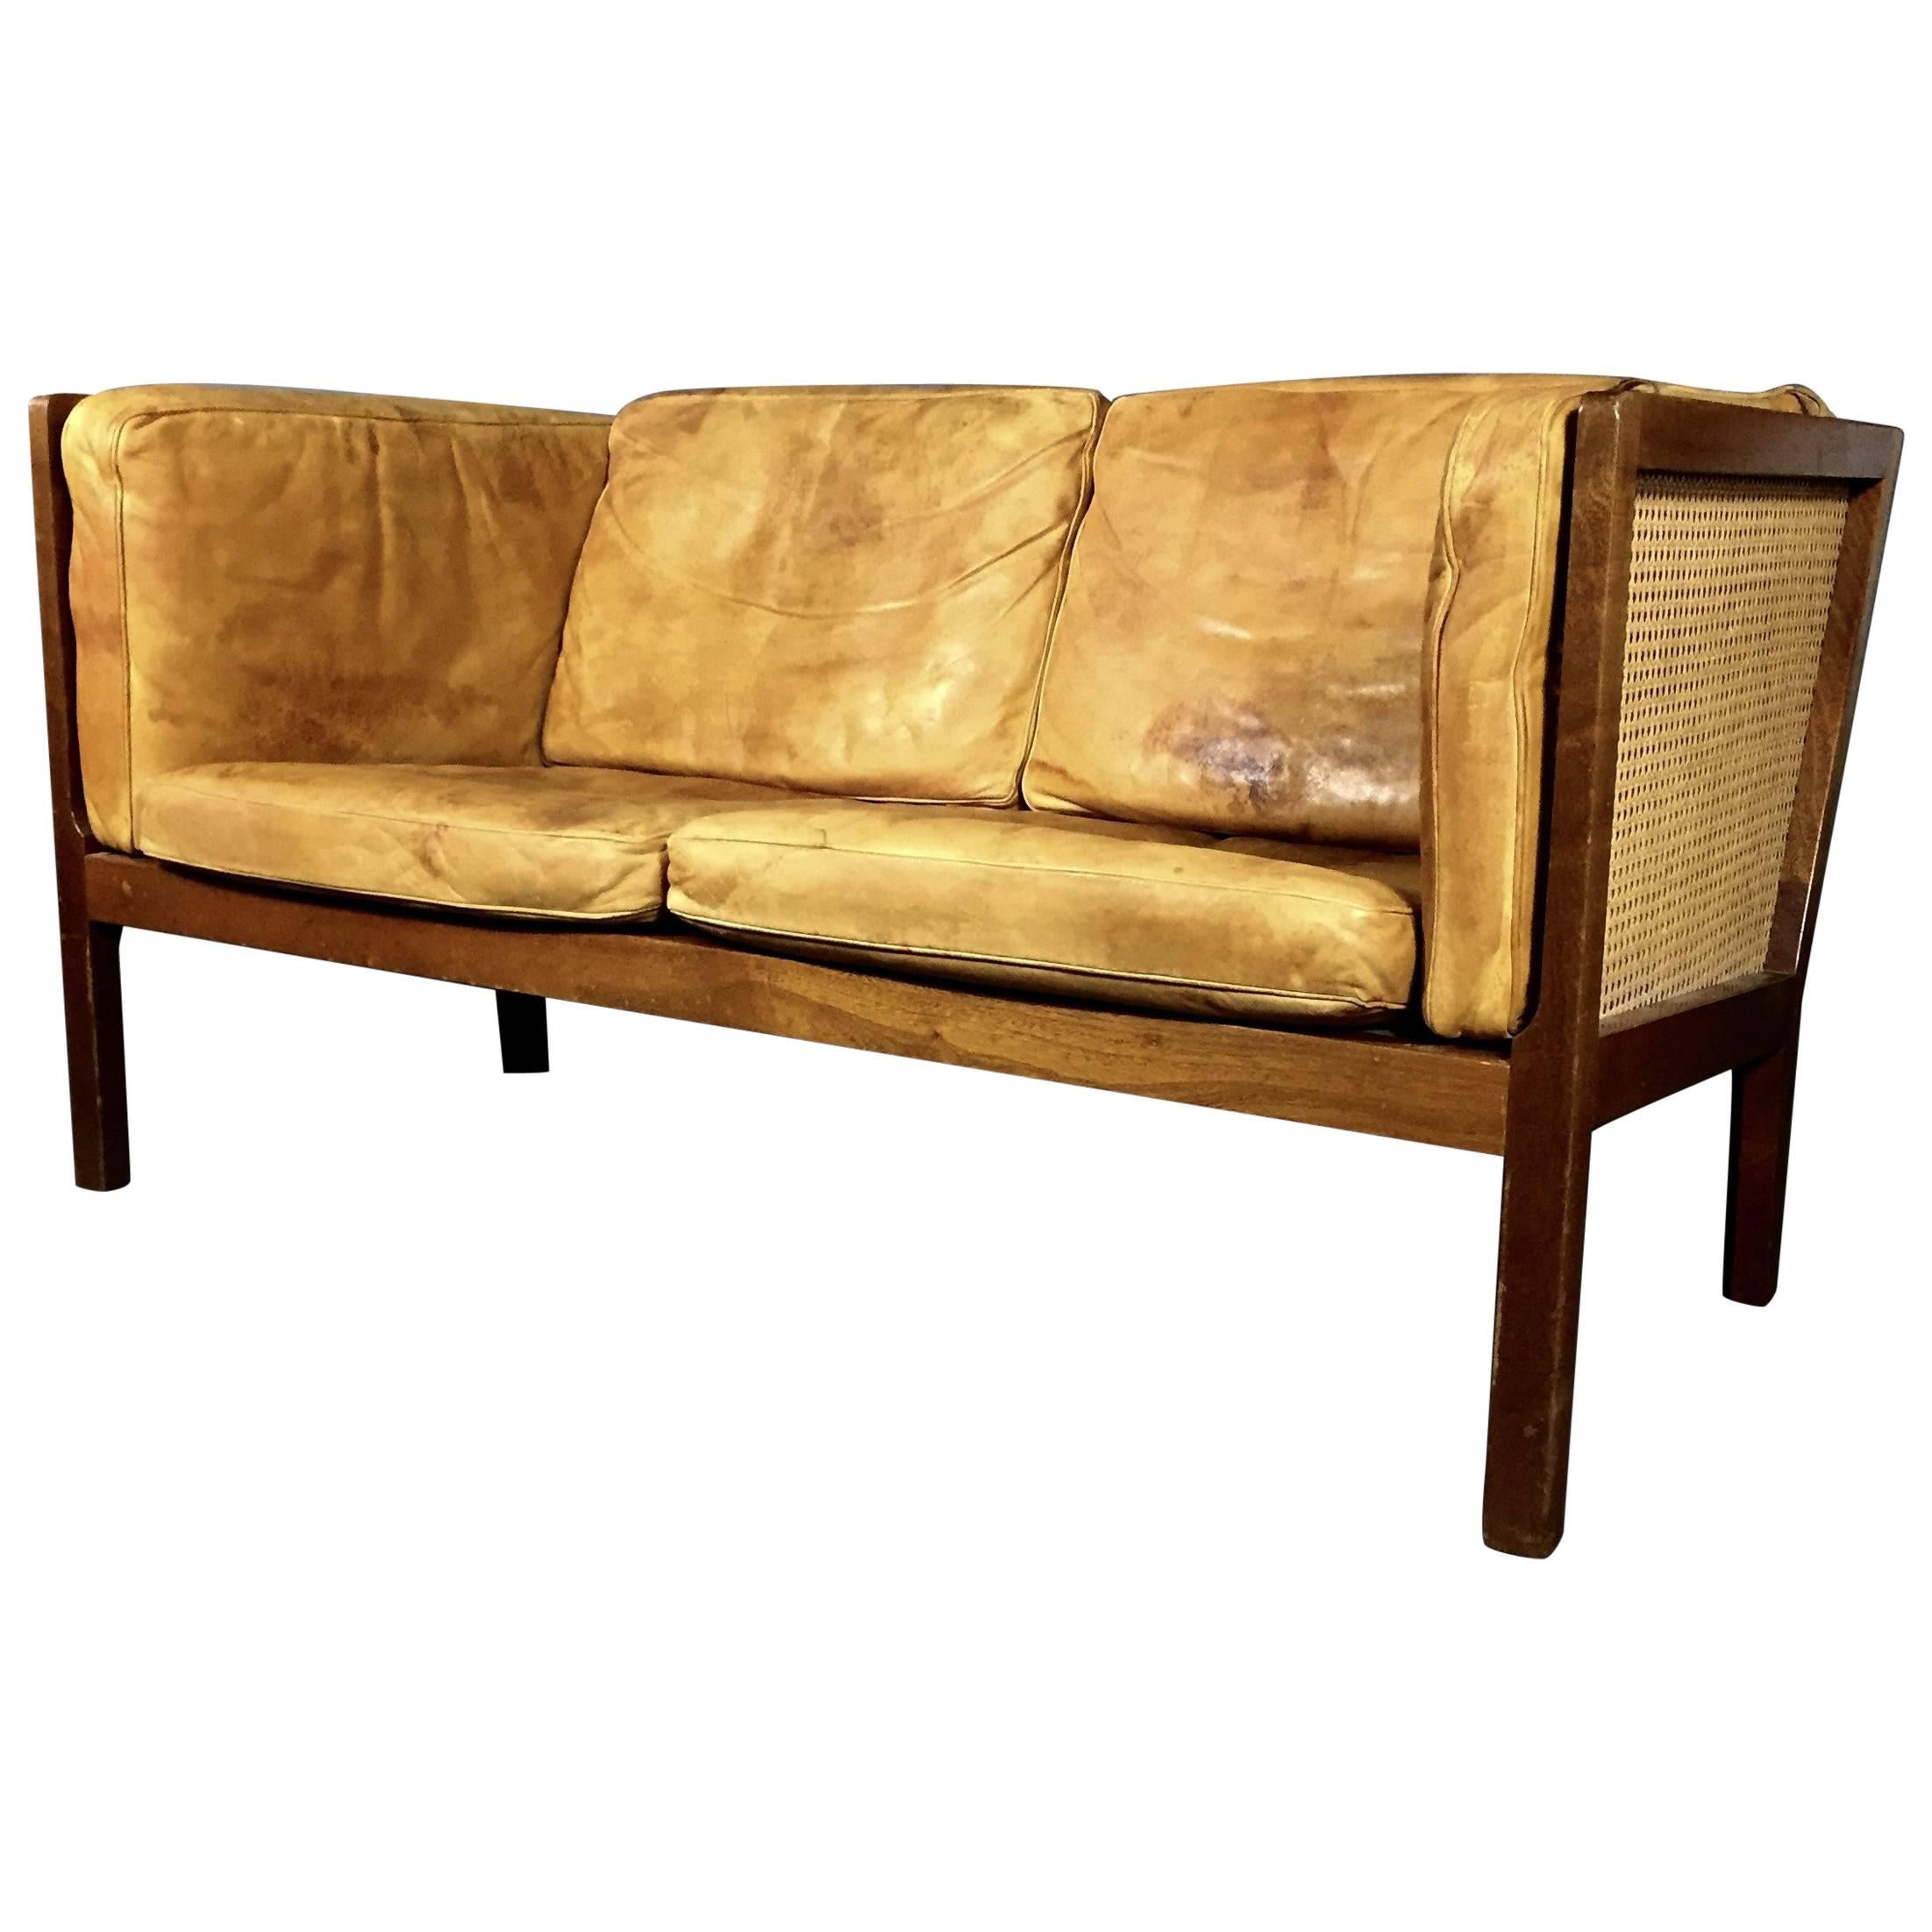 Bernt Petersen Two-Seat Leather and Cane Sofa by Wørts, Denmark, 1964